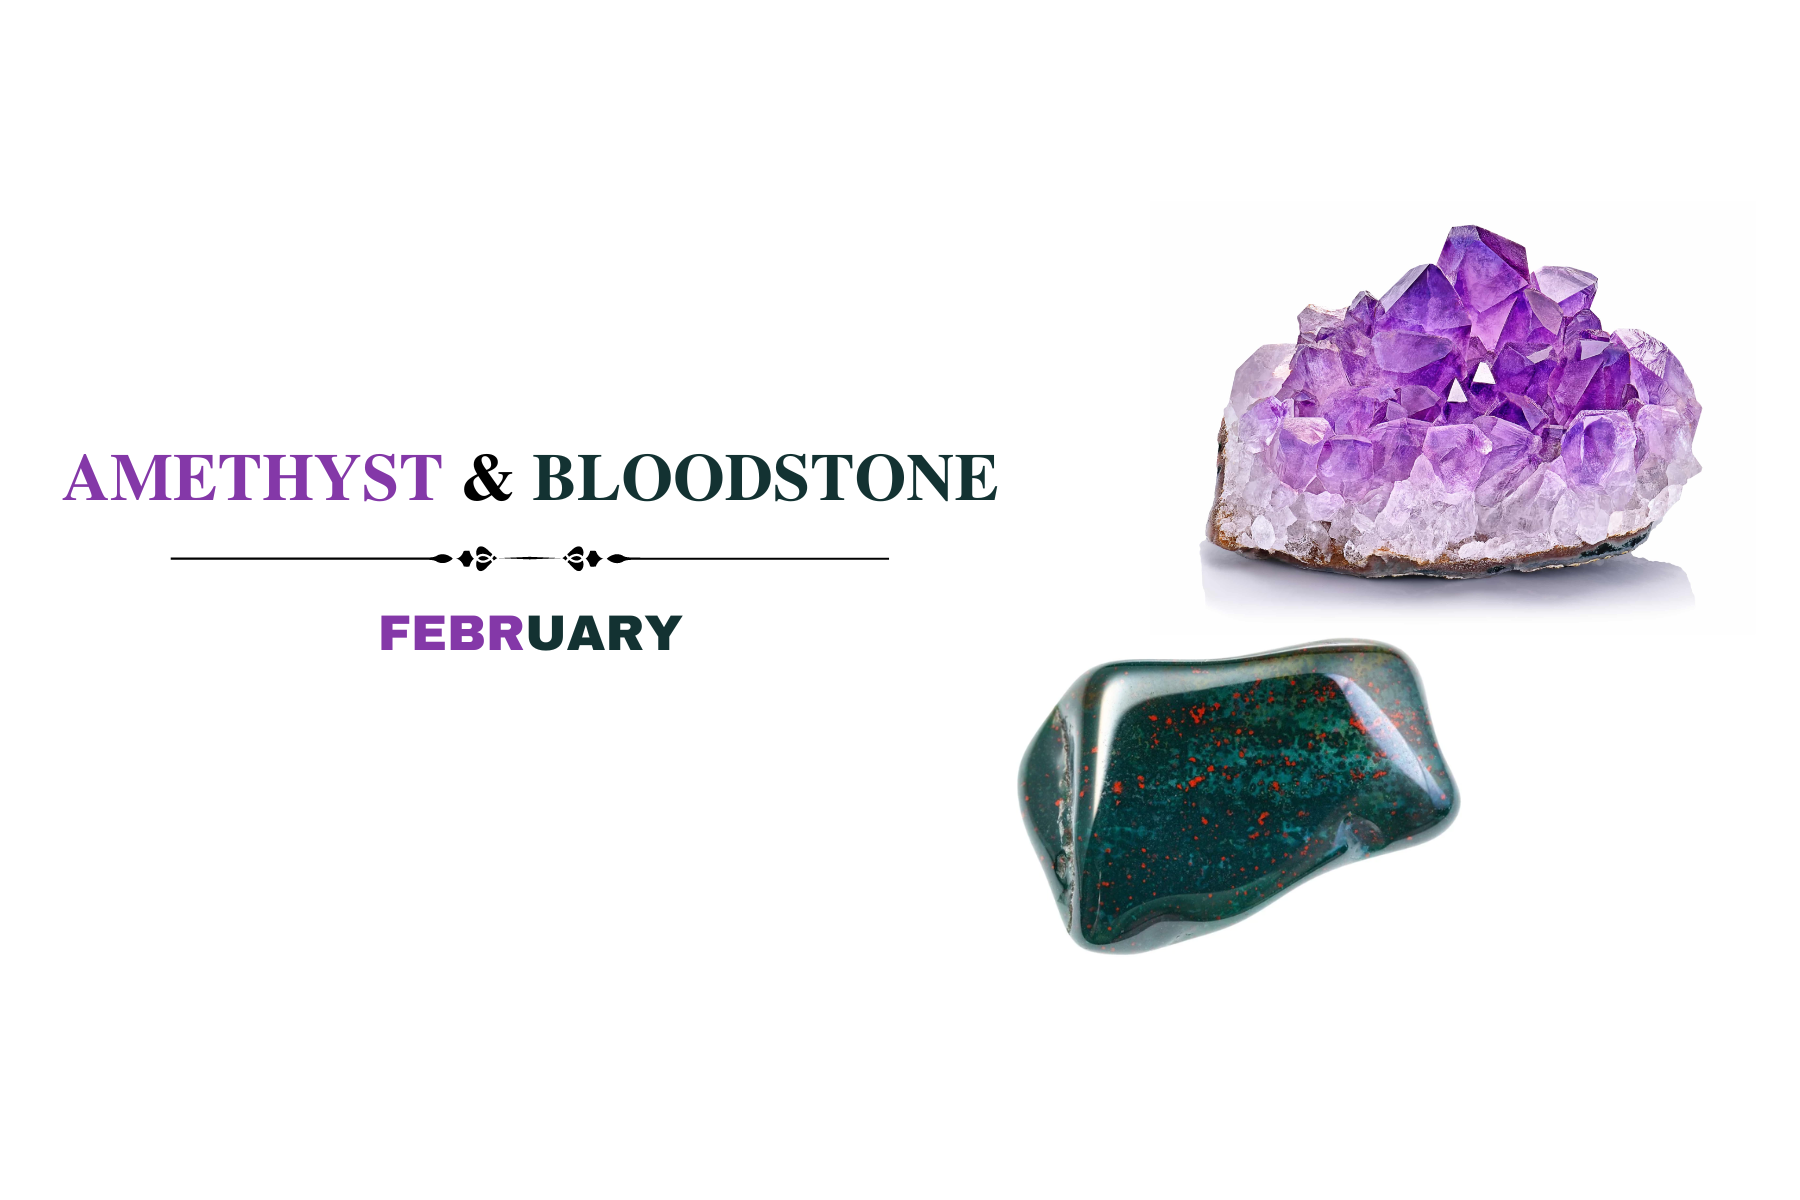 Amethyst and Bloodstone